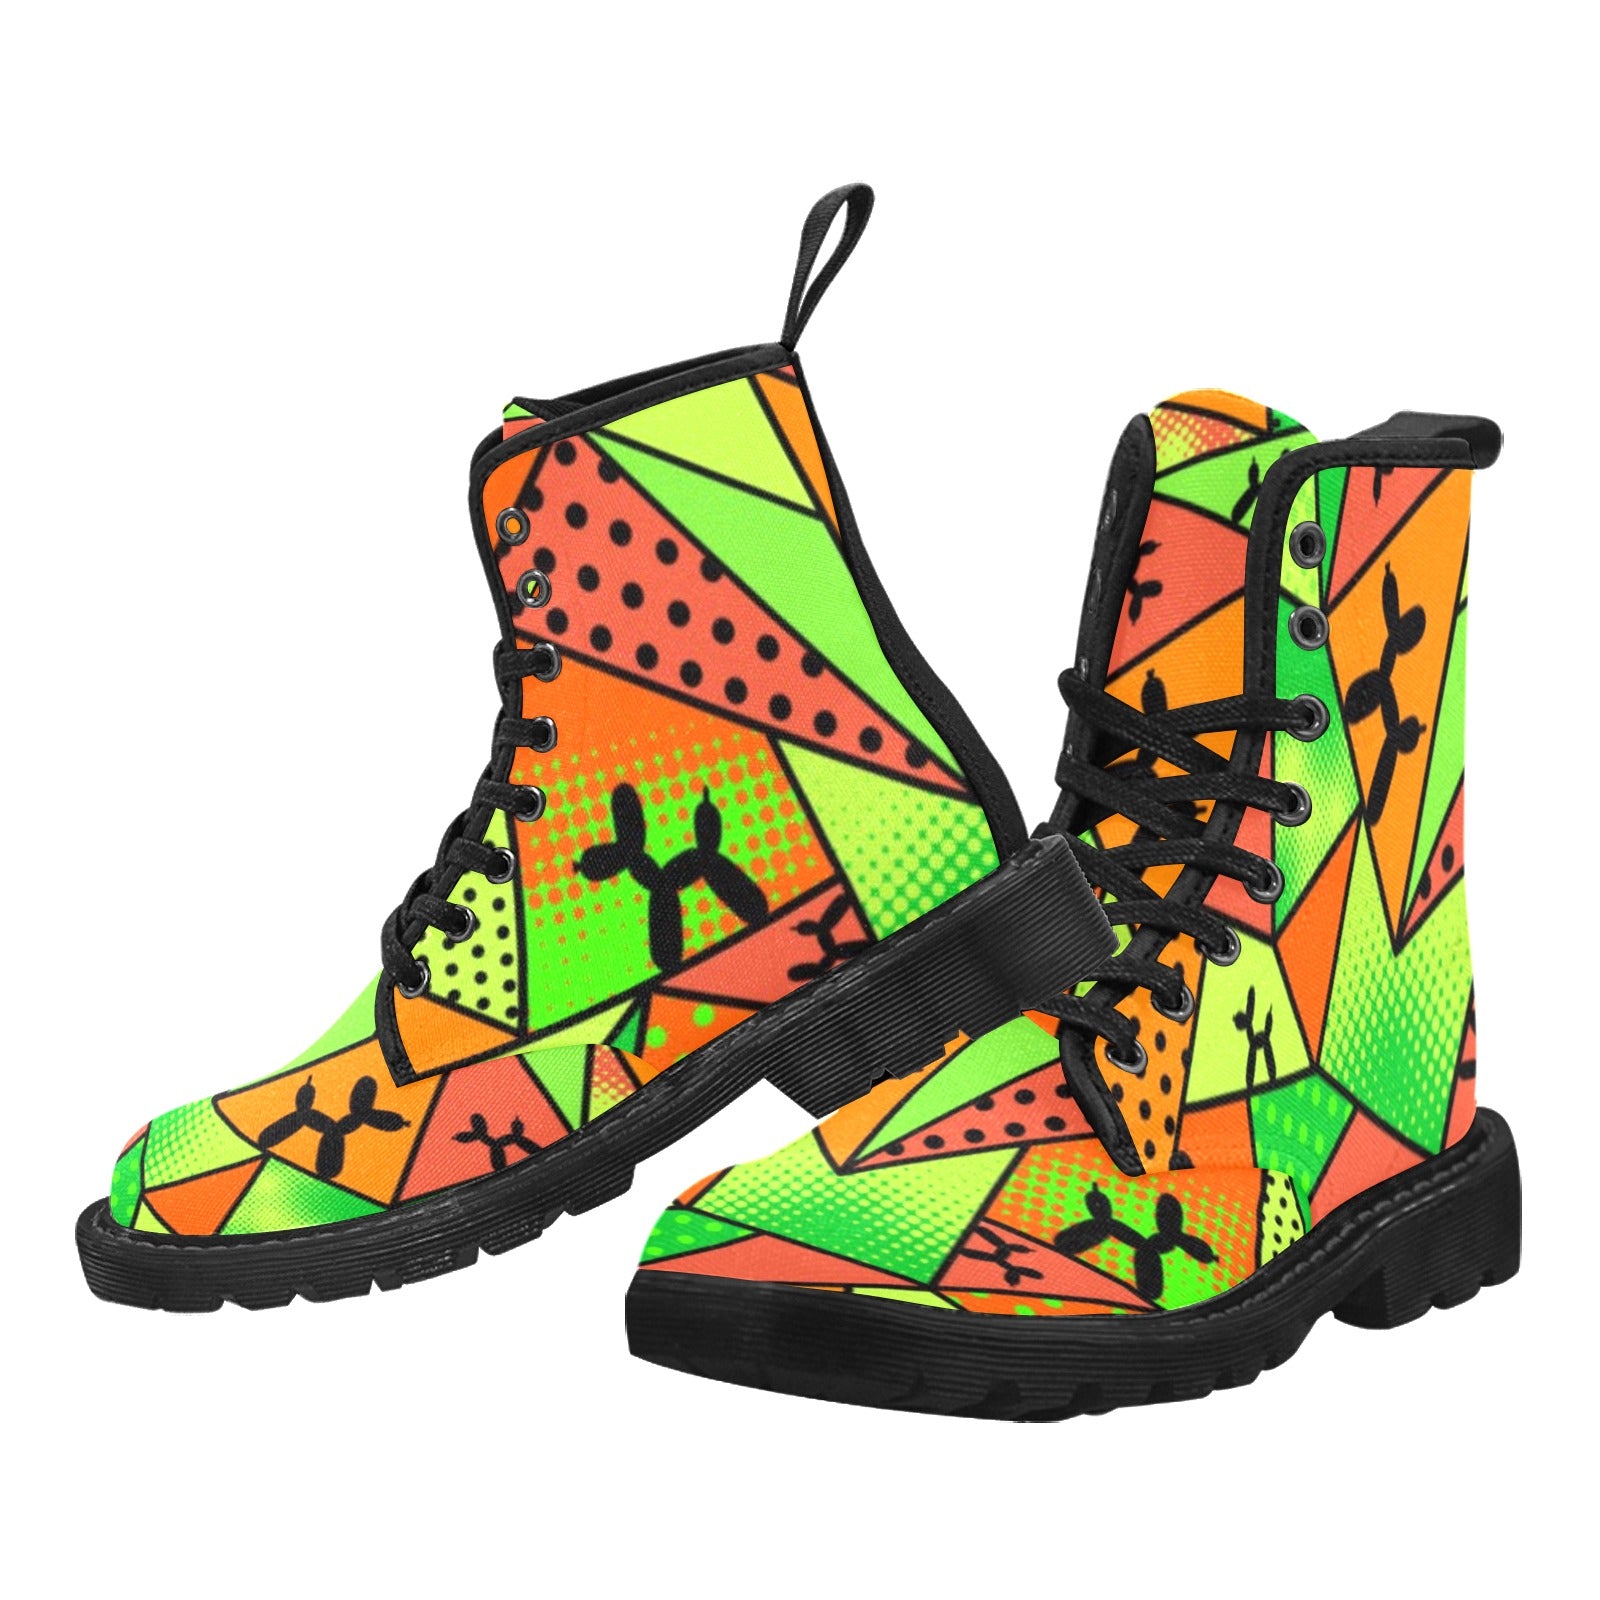 Combat boots for balloon twisters in orange, green, and black colors